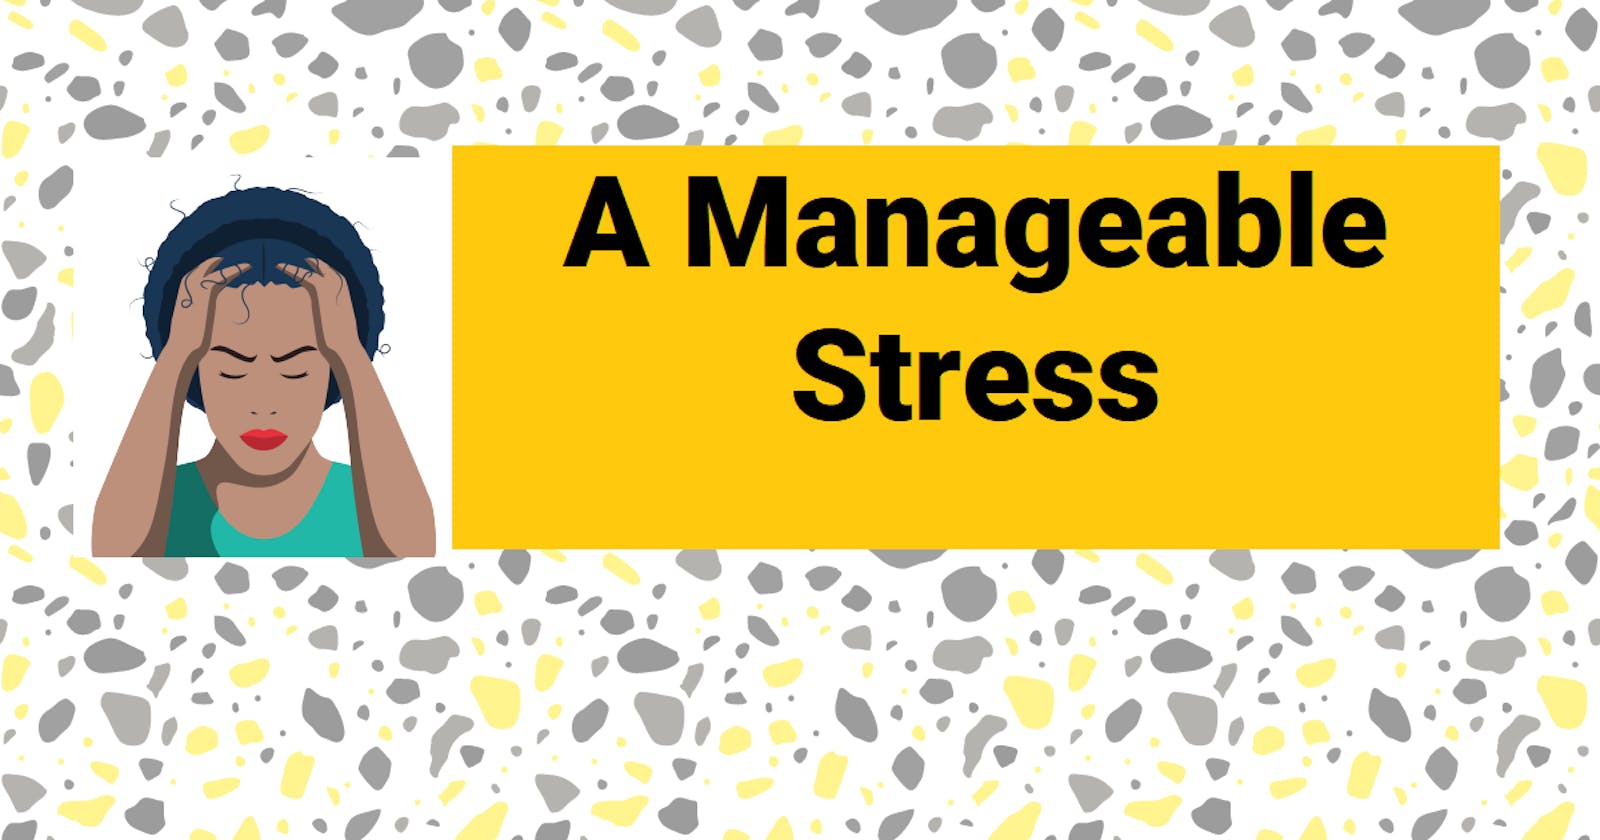 A Manageable Stress